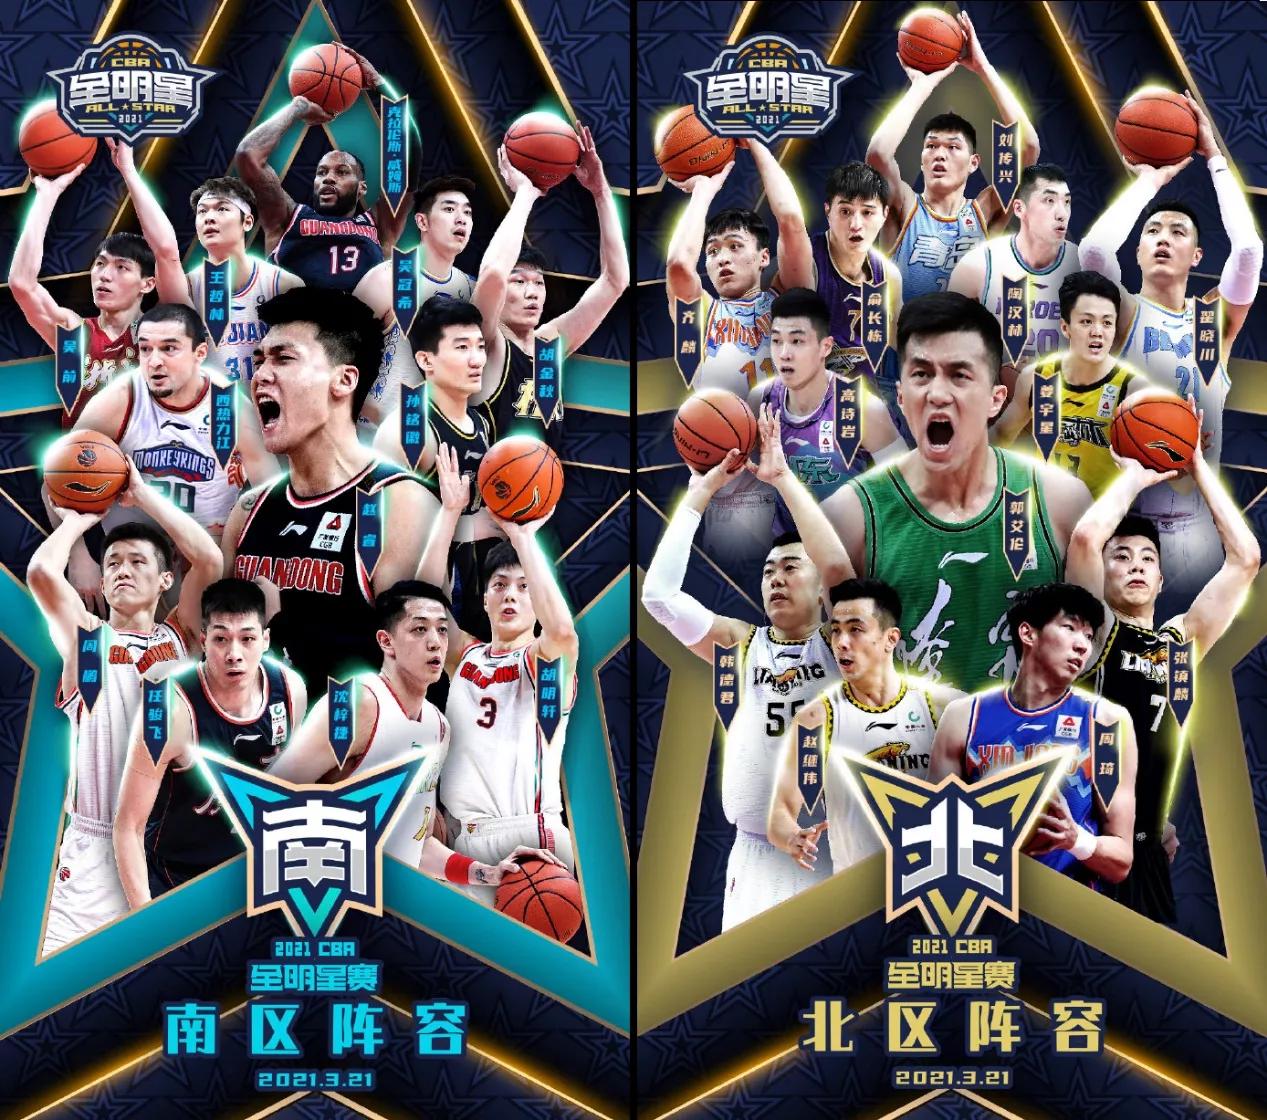 Belong to Chinese basketball this weekend! CBA complete star is performed in Qingdao on the weekend